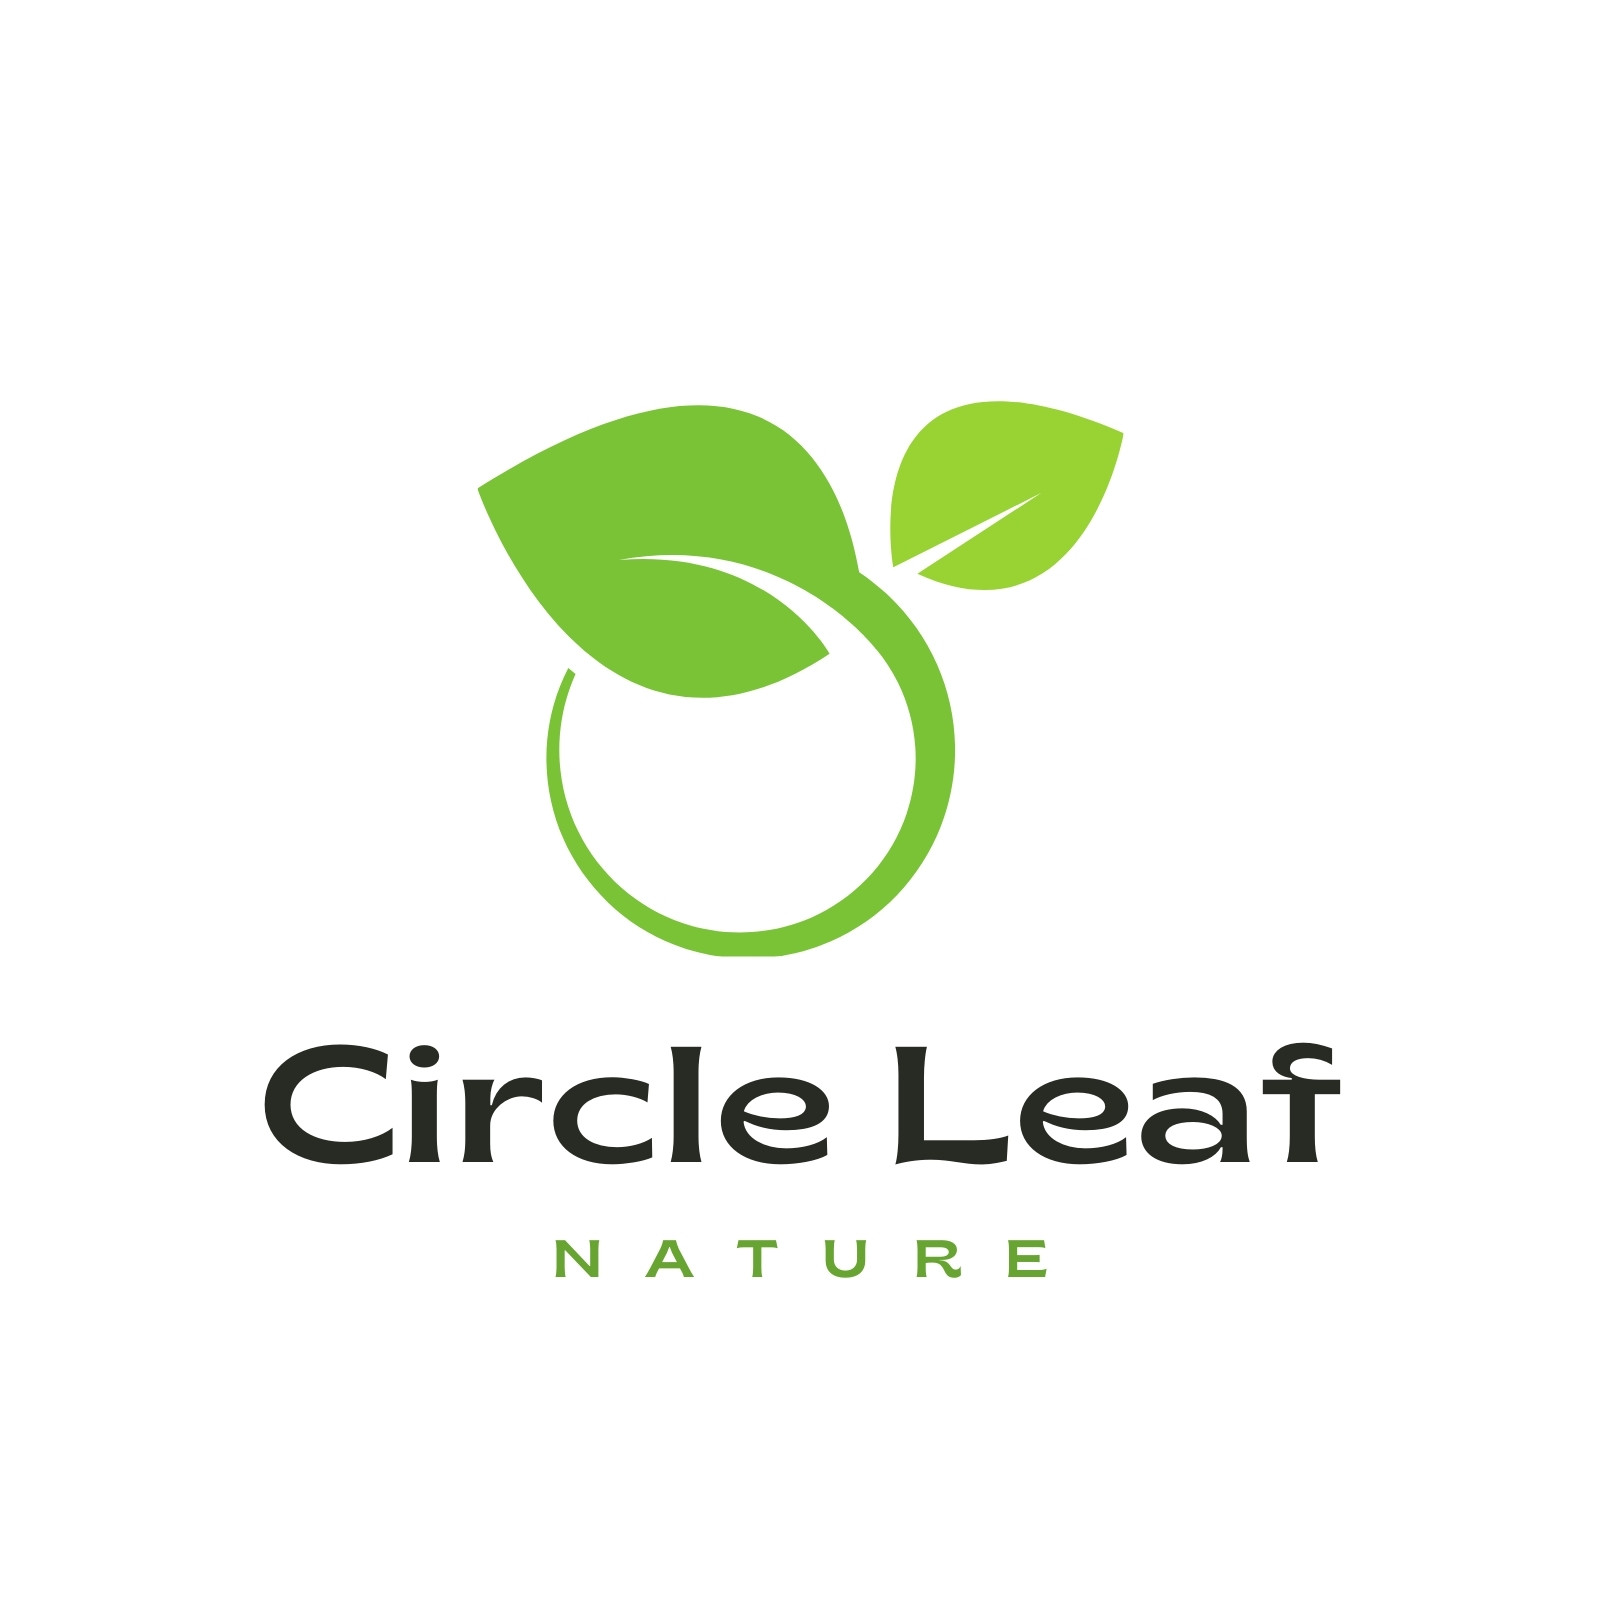 Hand Circle Leaf Logo Photos and Images | Shutterstock